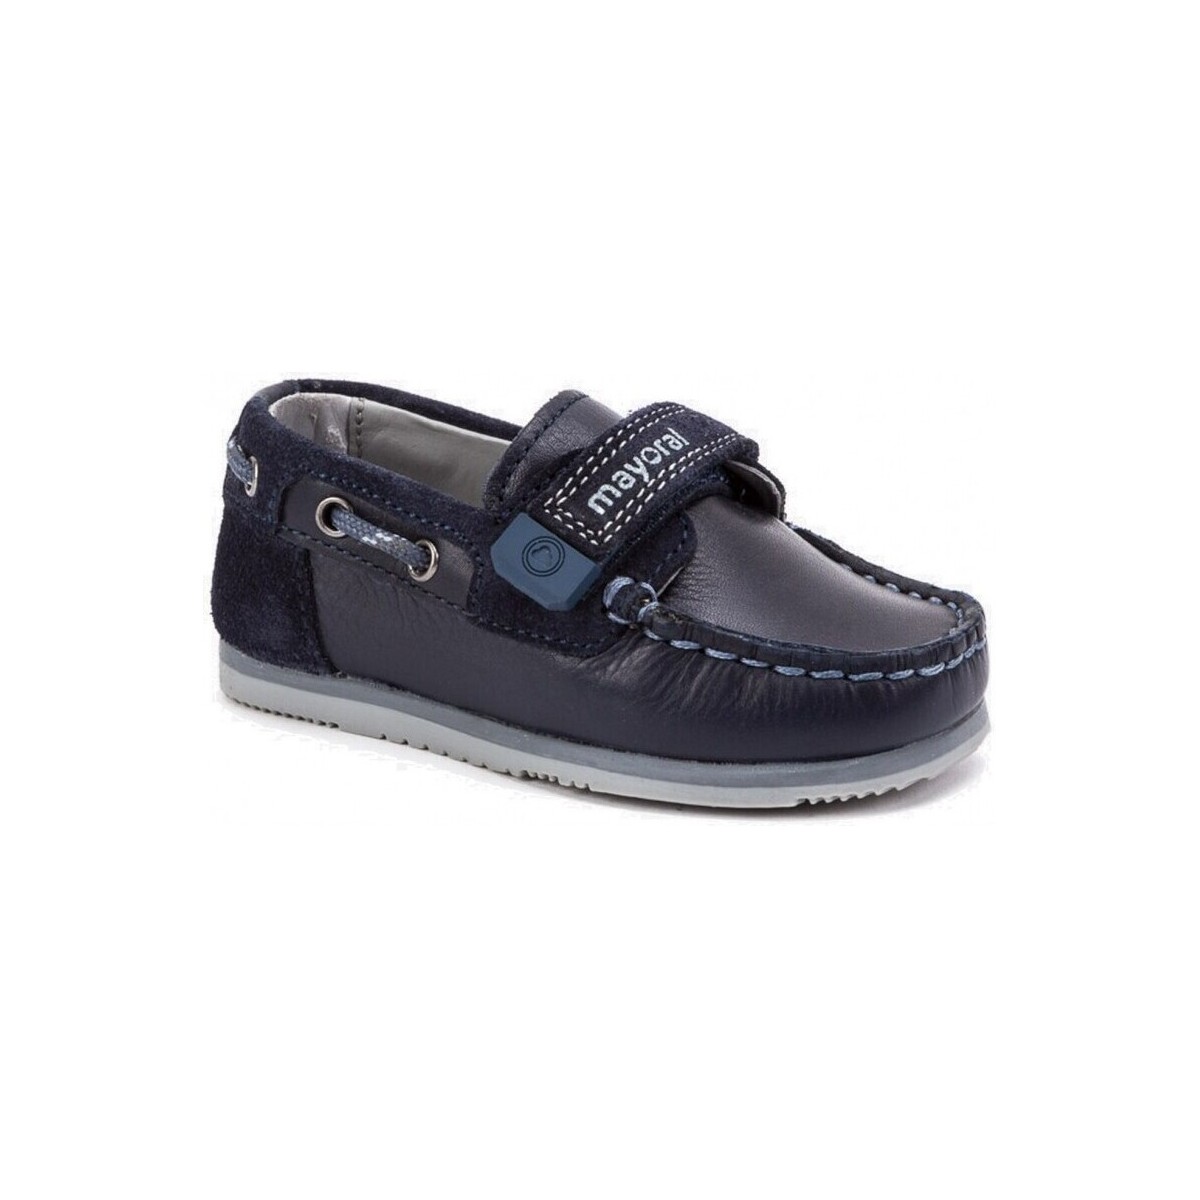 Boat shoes Mayoral 24043-18